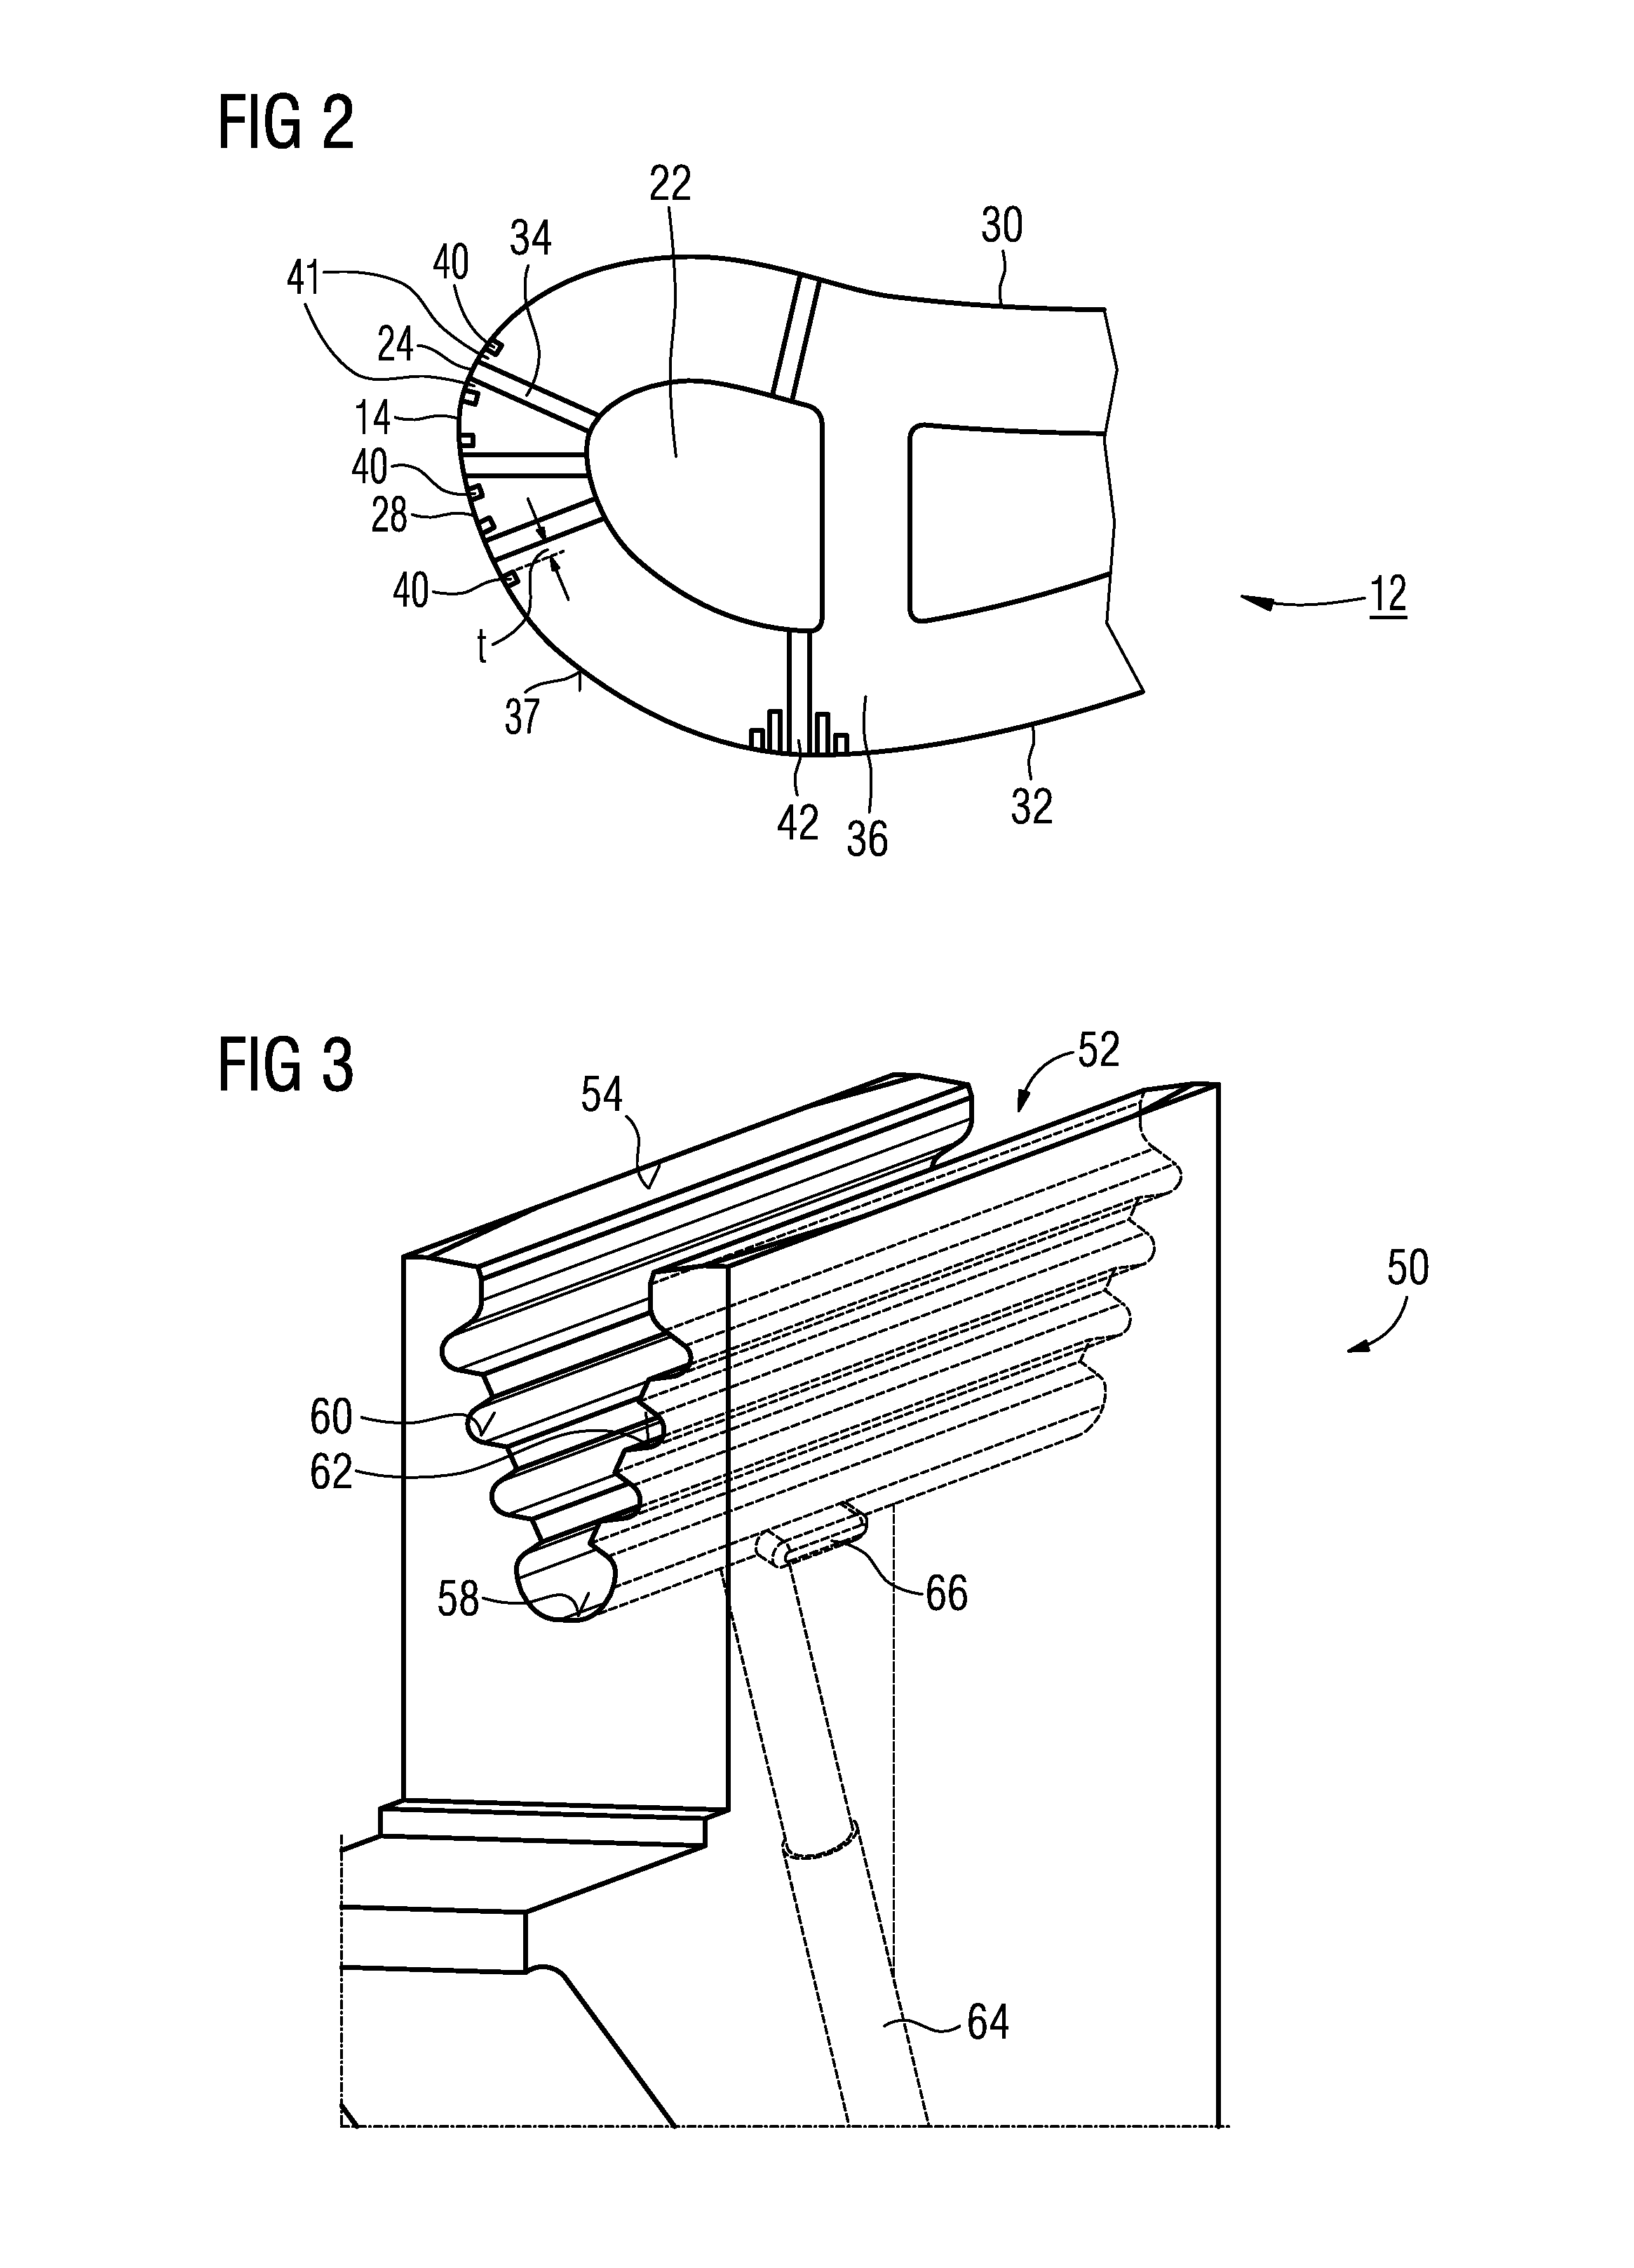 Cooling of a gas turbine component designed as a rotor disk or turbine blade